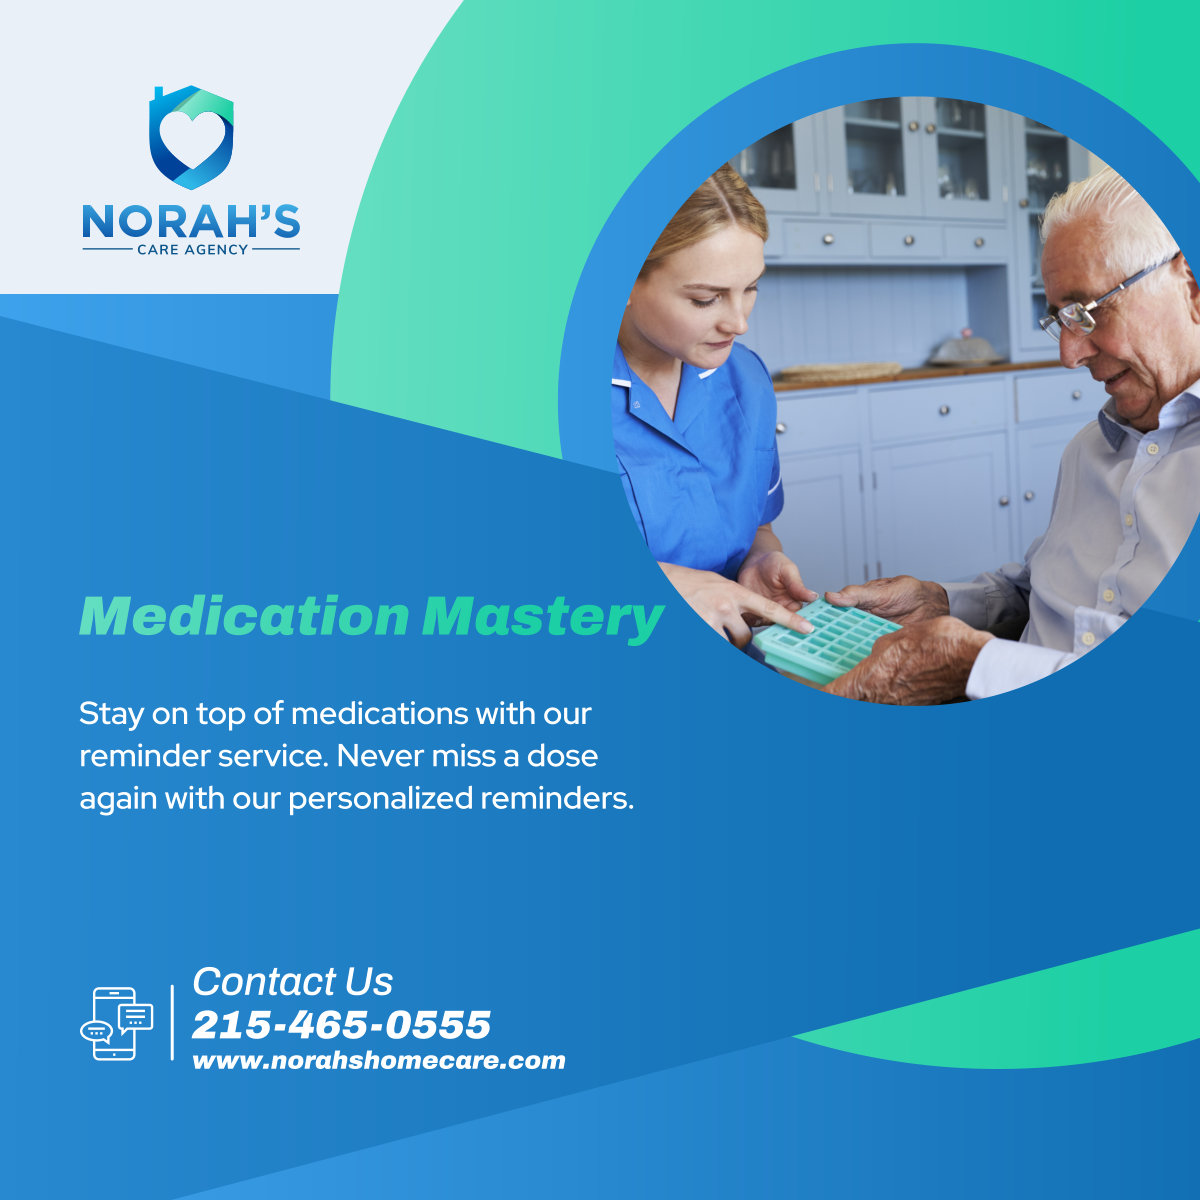 Stay on top of medications effortlessly with our reminder service. Never miss a dose again. Contact us now! 

#MedicationReminder #PhiladelphiaPA #HomeCare